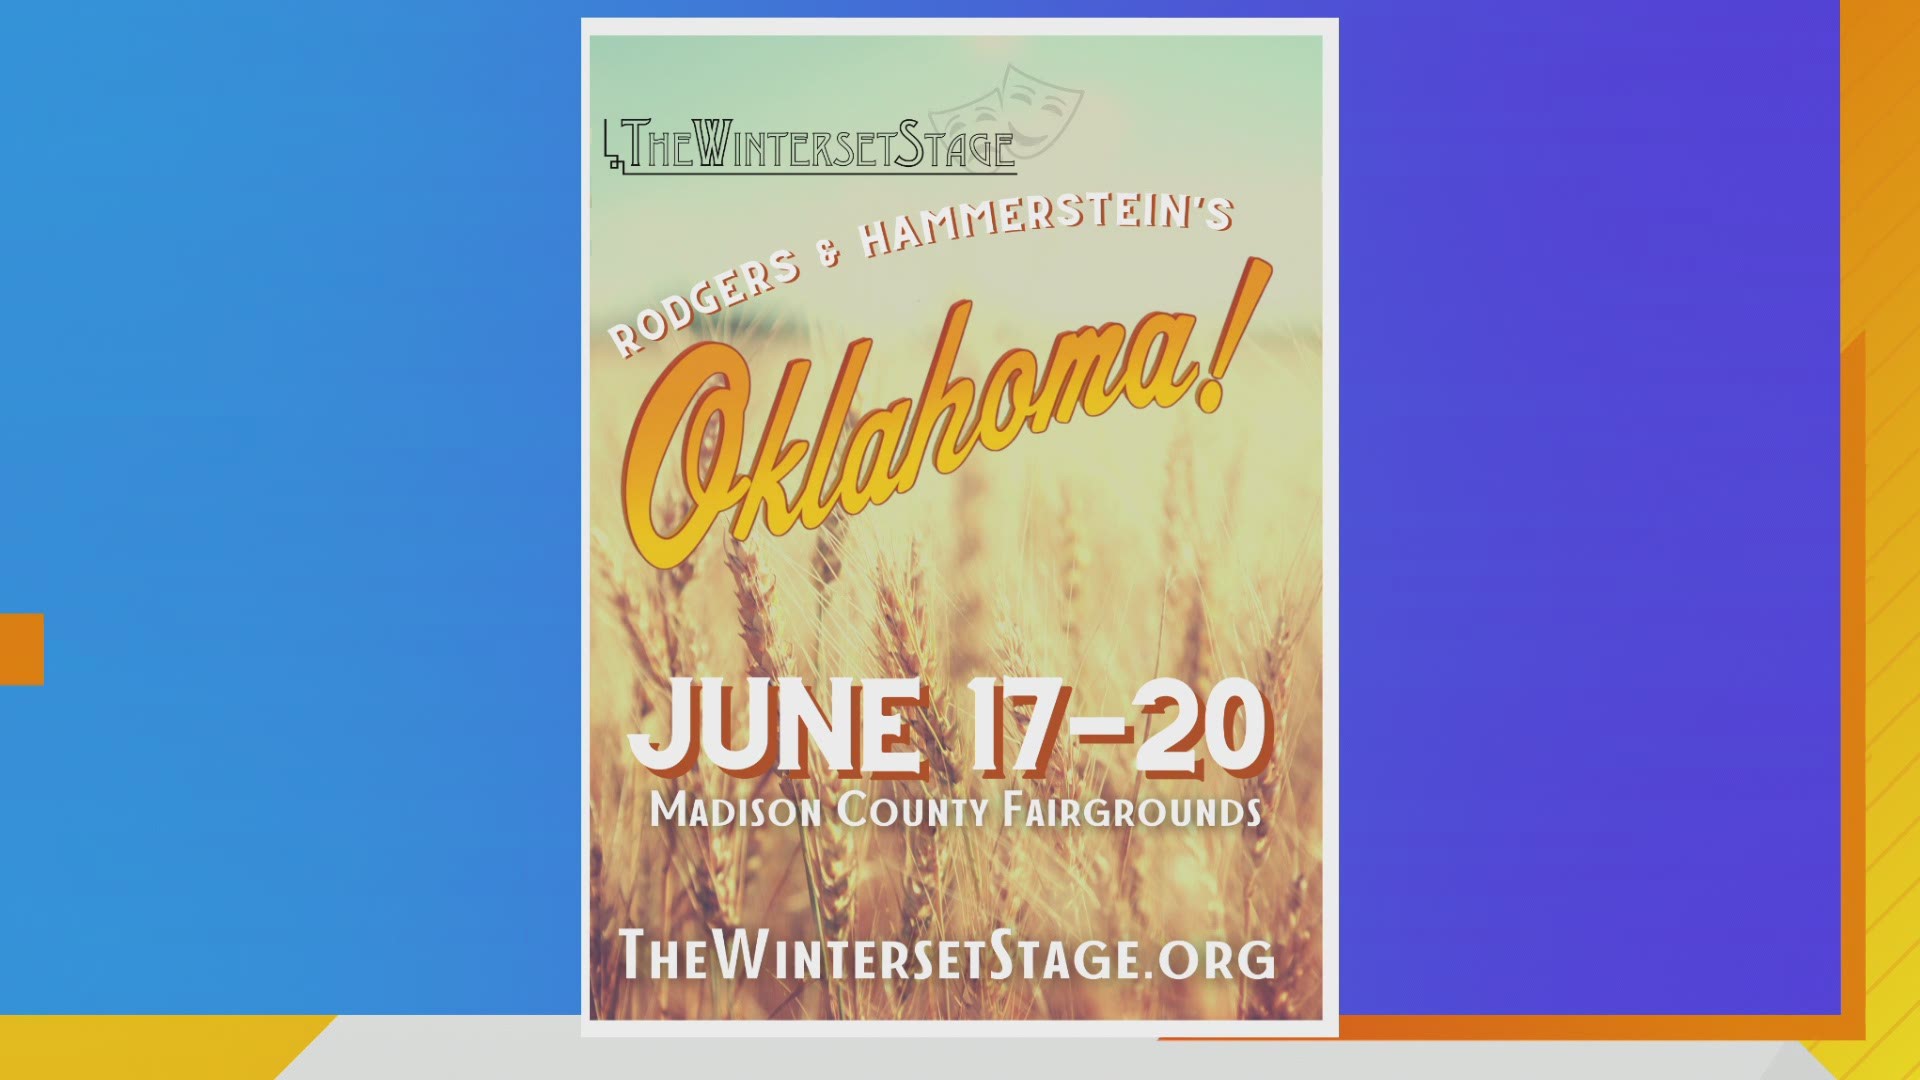 Director Scott Smith & "Curly" (Jon Barrett) talk about the musical production of "Oklahoma!" coming to the Madison County Fairgrounds June 17-20, 2021